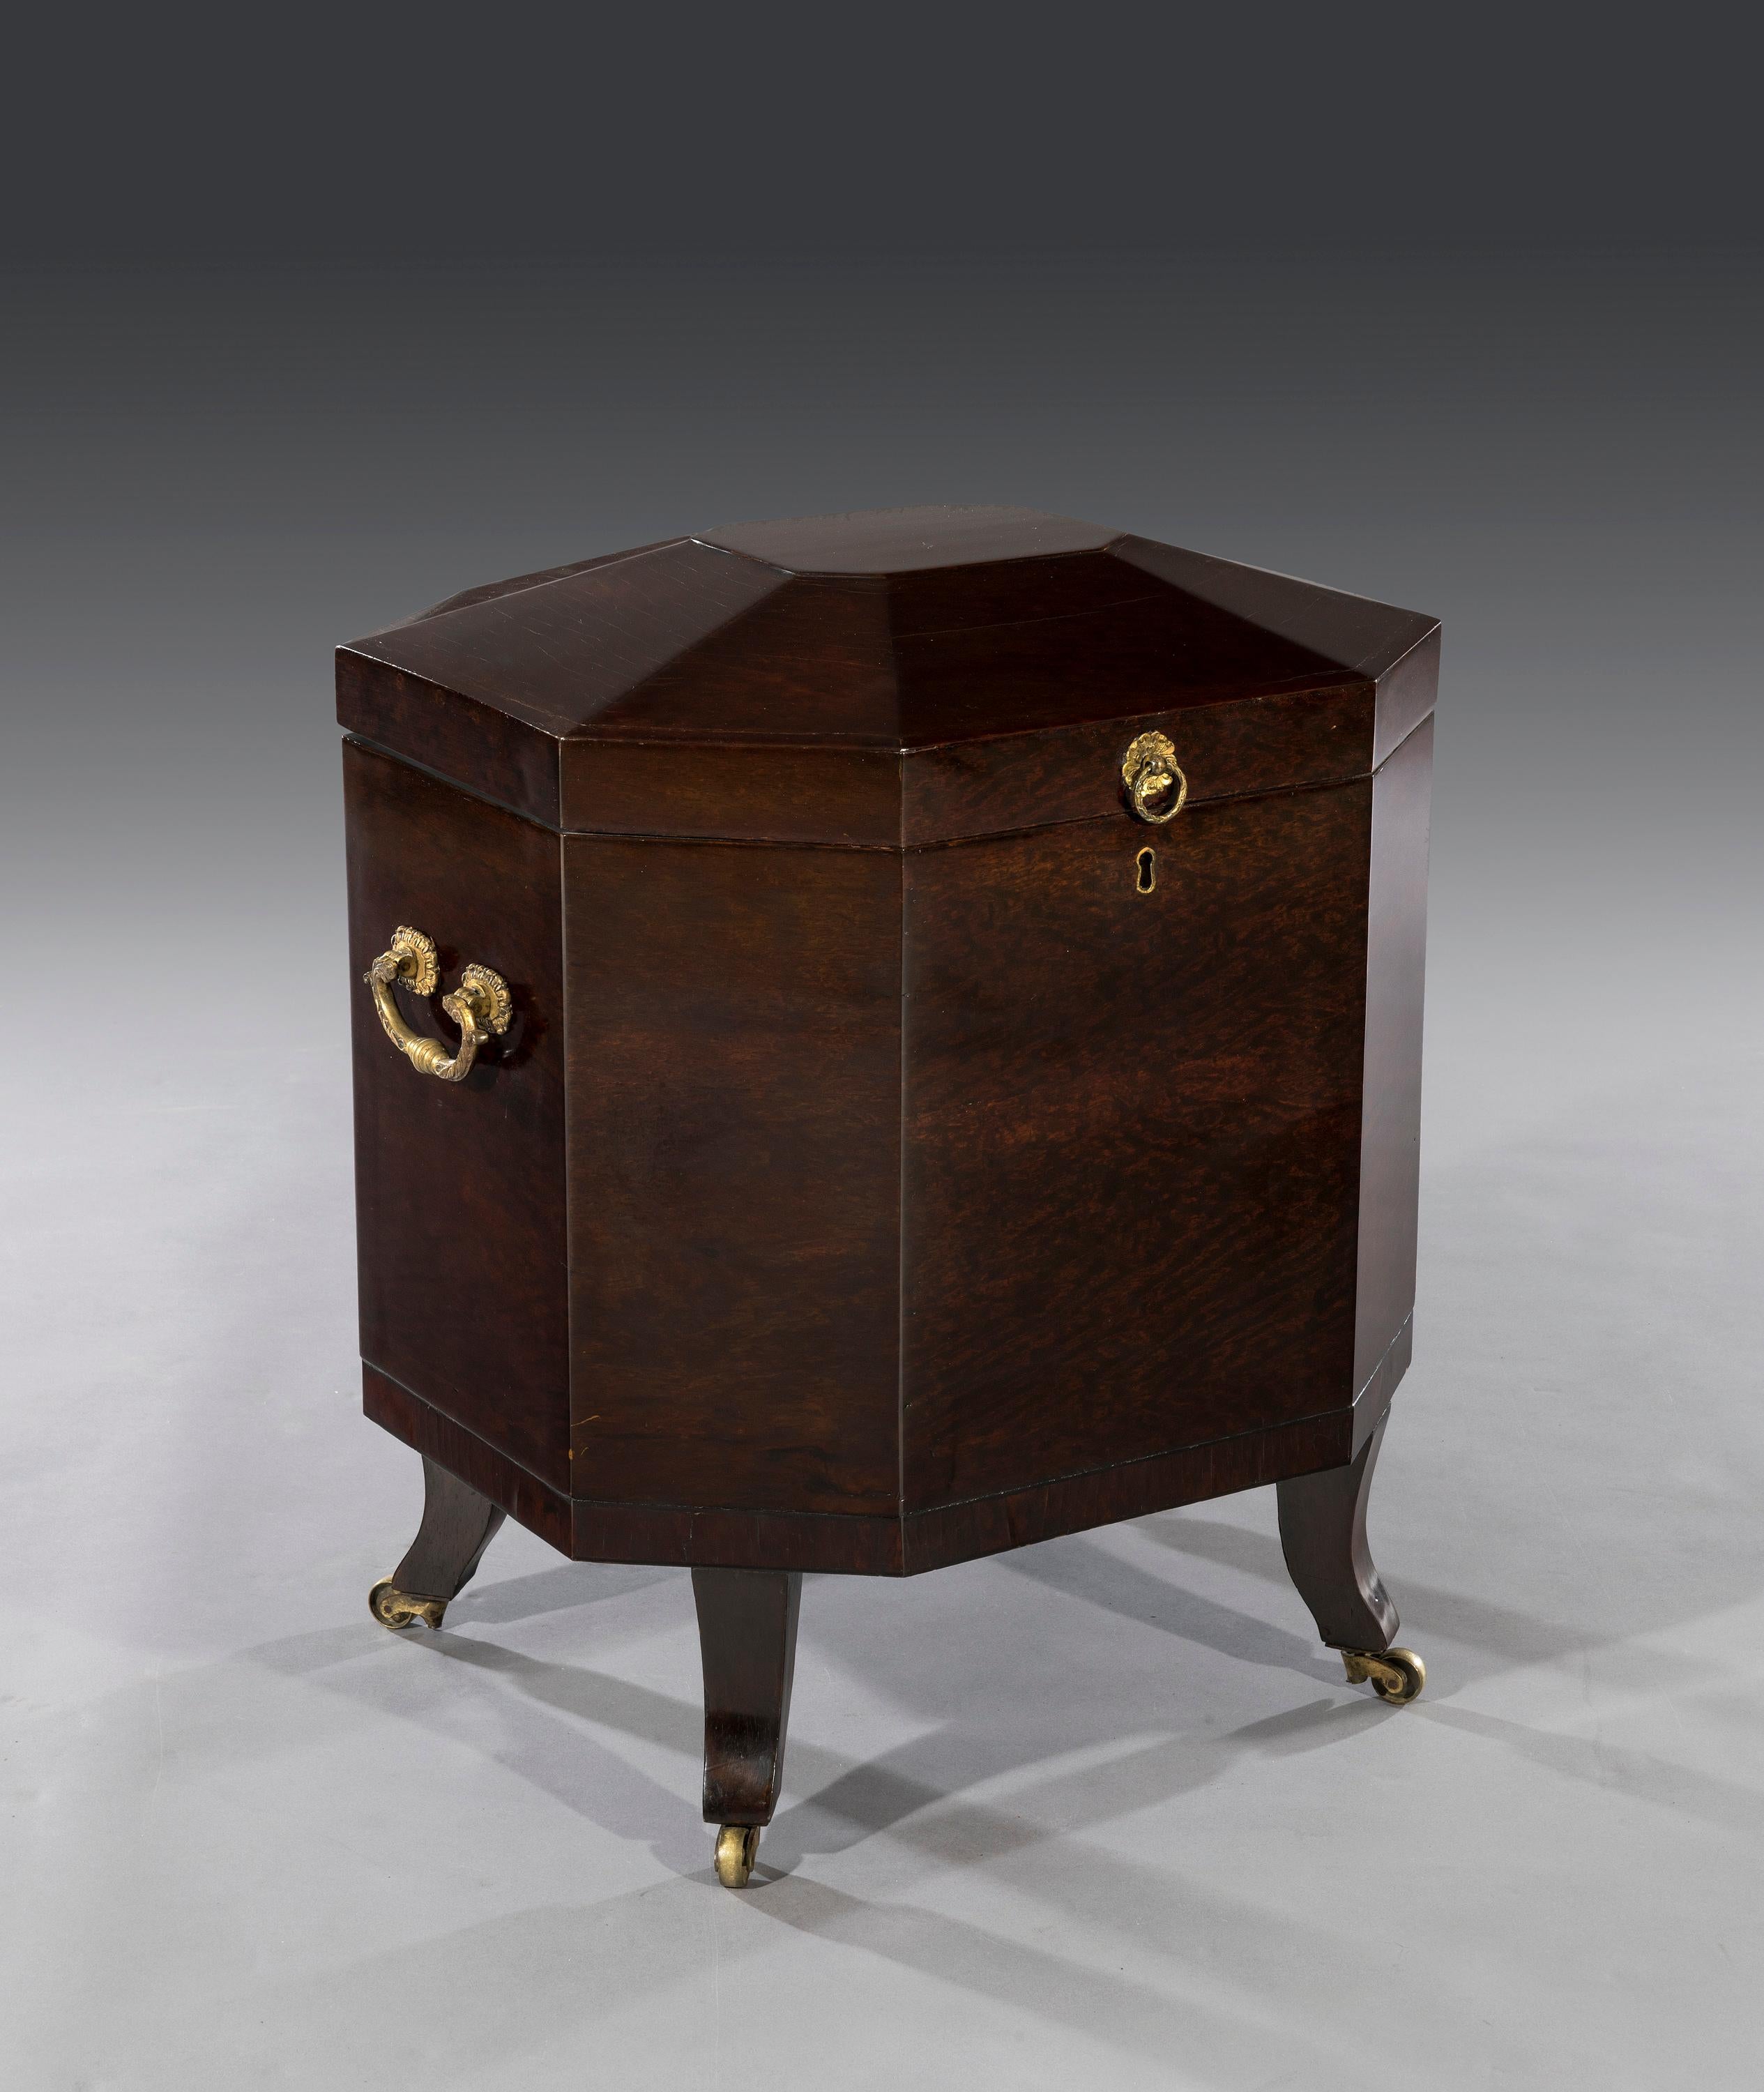 Early 19th Century RARE Regency Period Octagonal Partridgewood Wine Cellaret For Sale 1